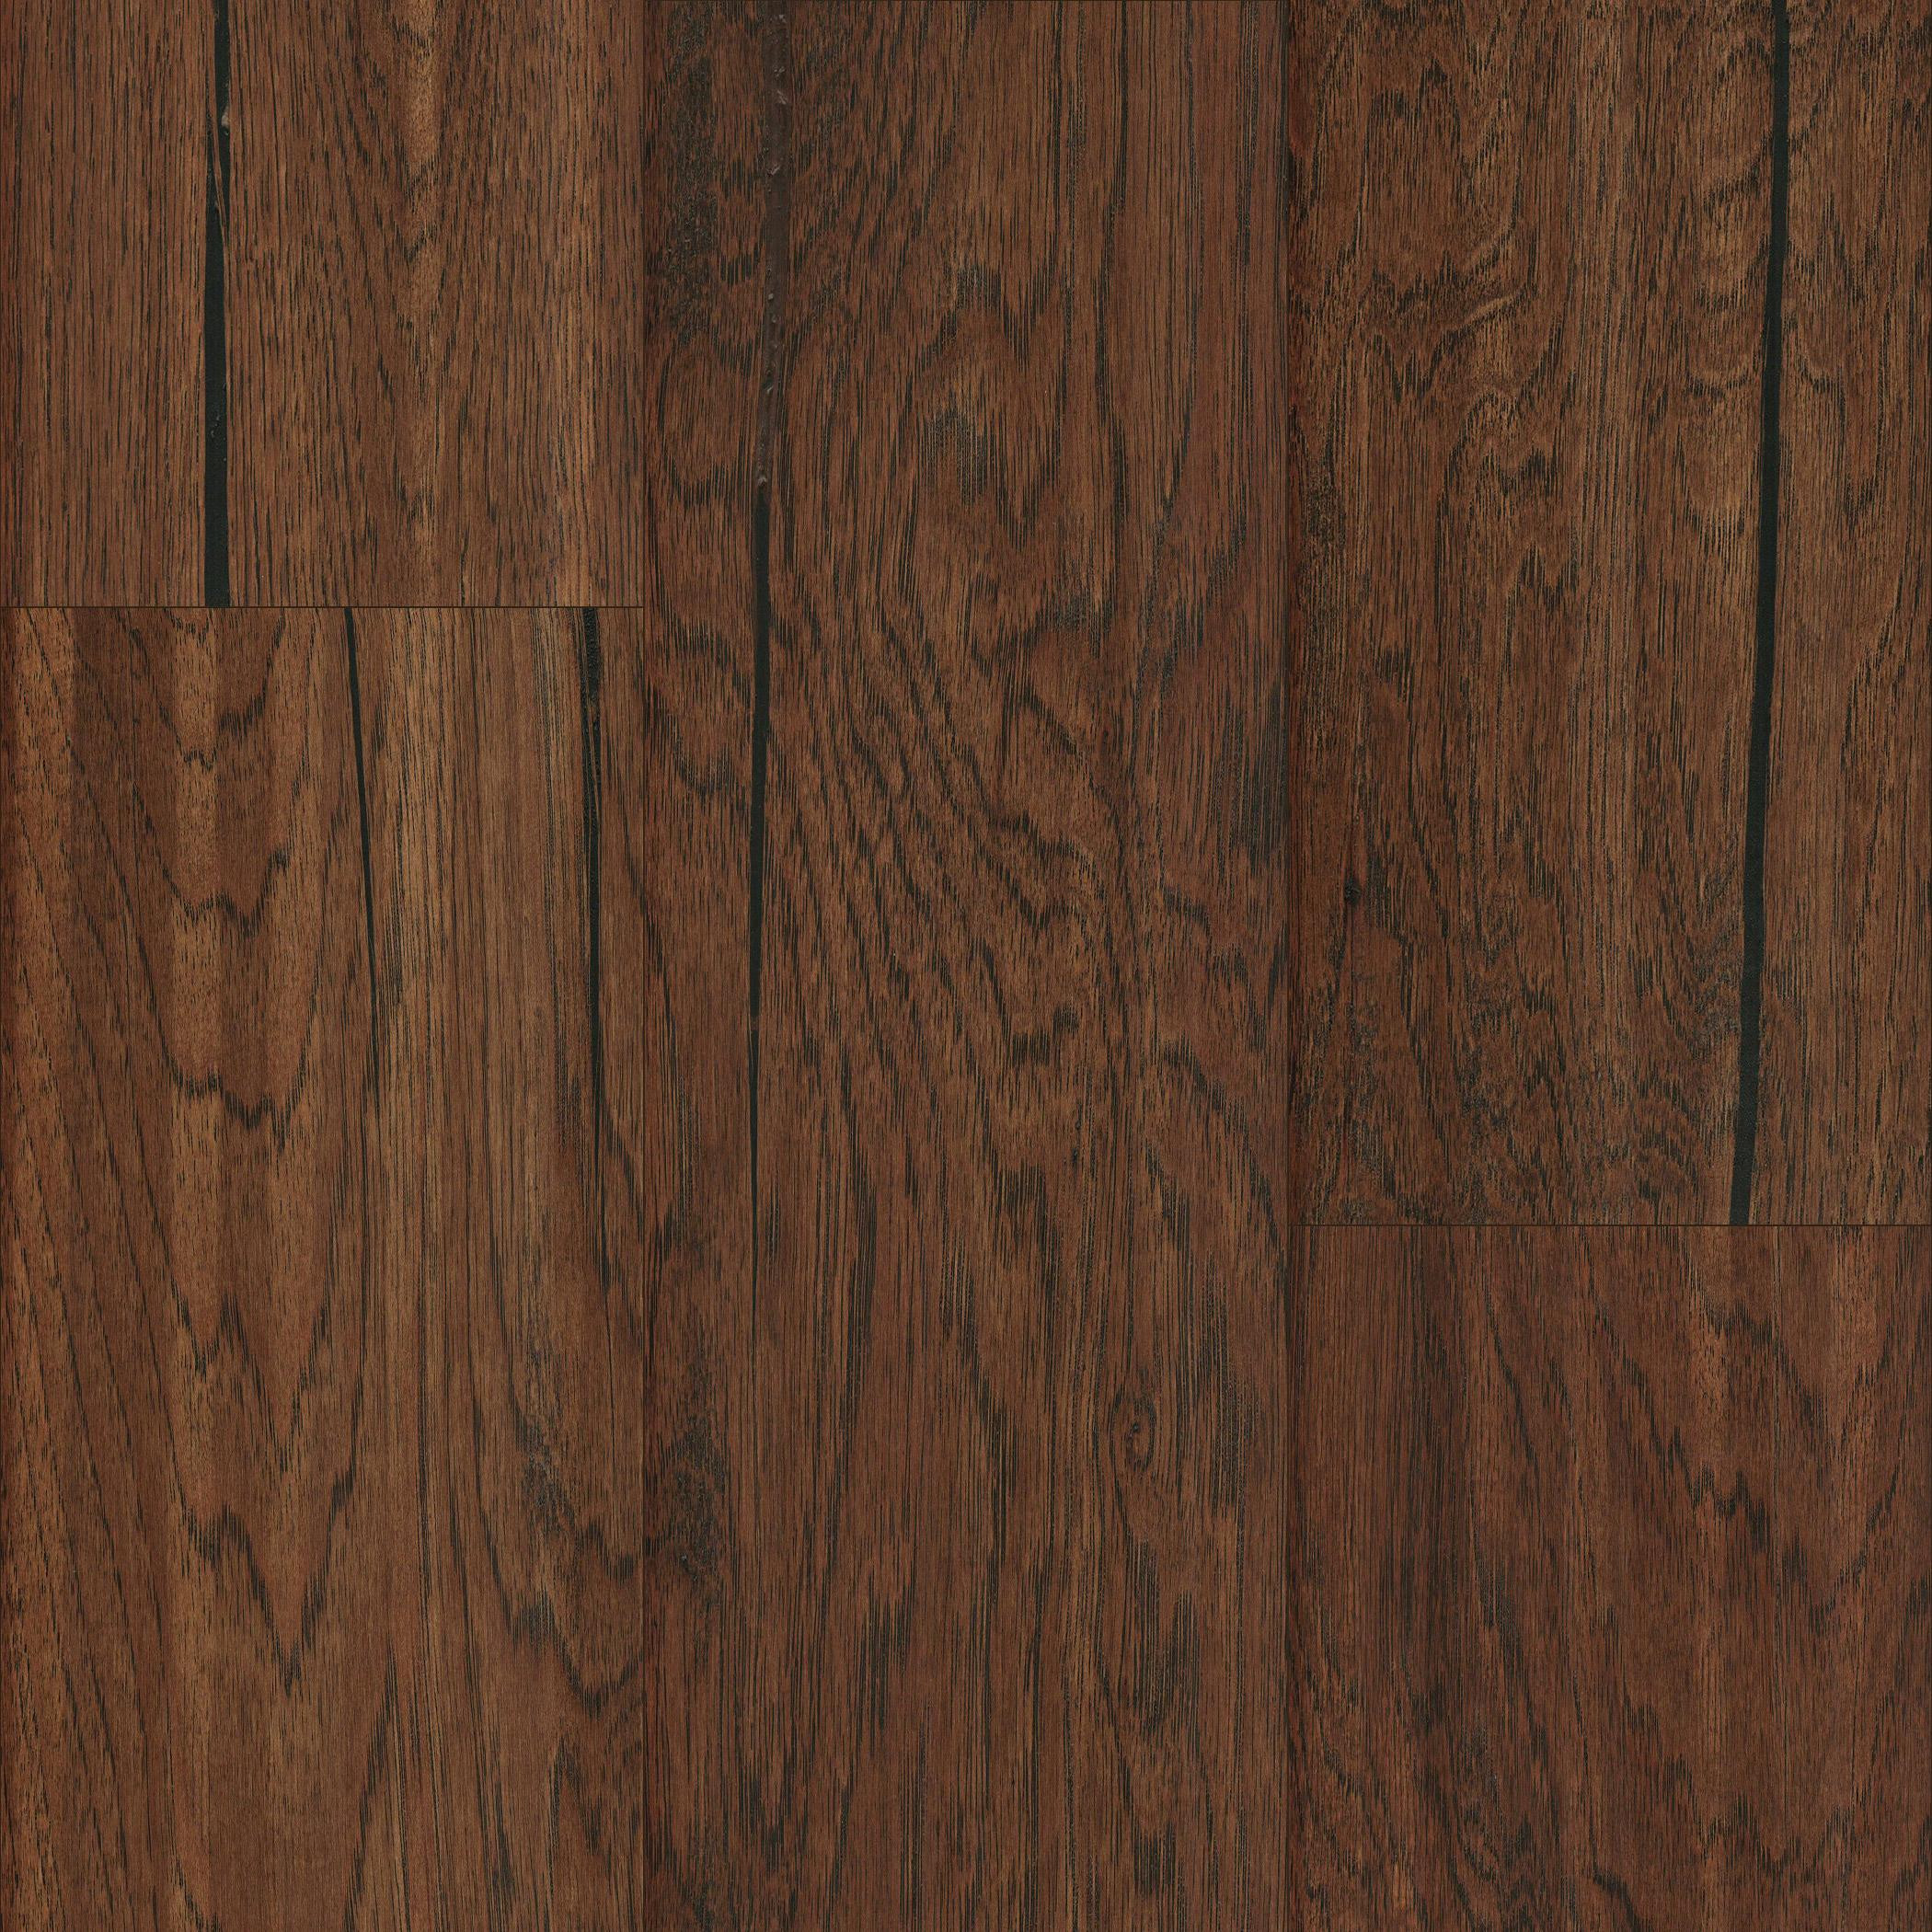 13 Lovely Laminate and Hardwood Flooring Difference 2024 free download laminate and hardwood flooring difference of mullican san marco hickory provincial 7 sculpted engineered intended for mullican san marco hickory provincial 7 sculpted engineered hardwood flo